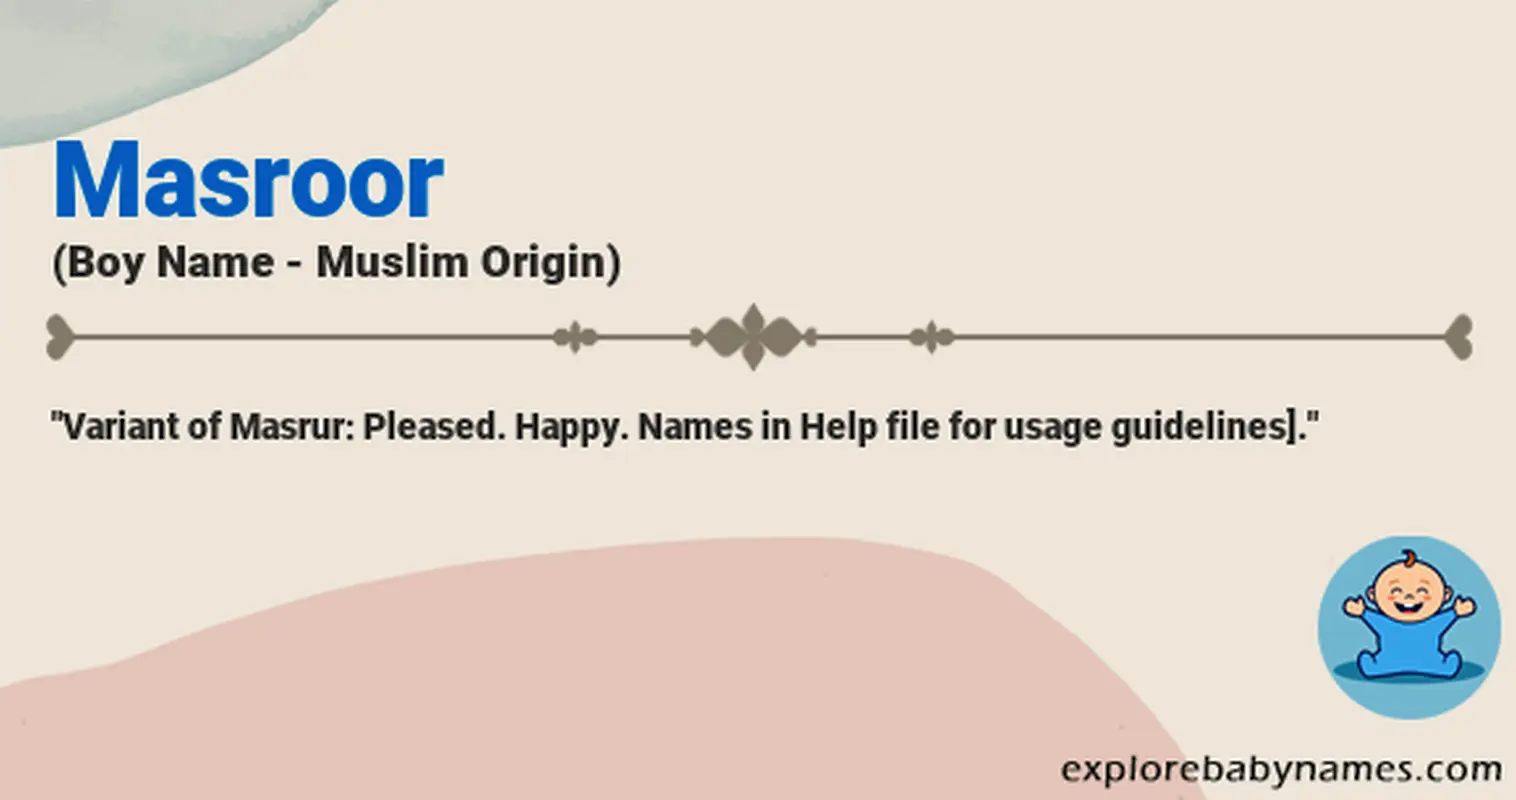 Meaning of Masroor